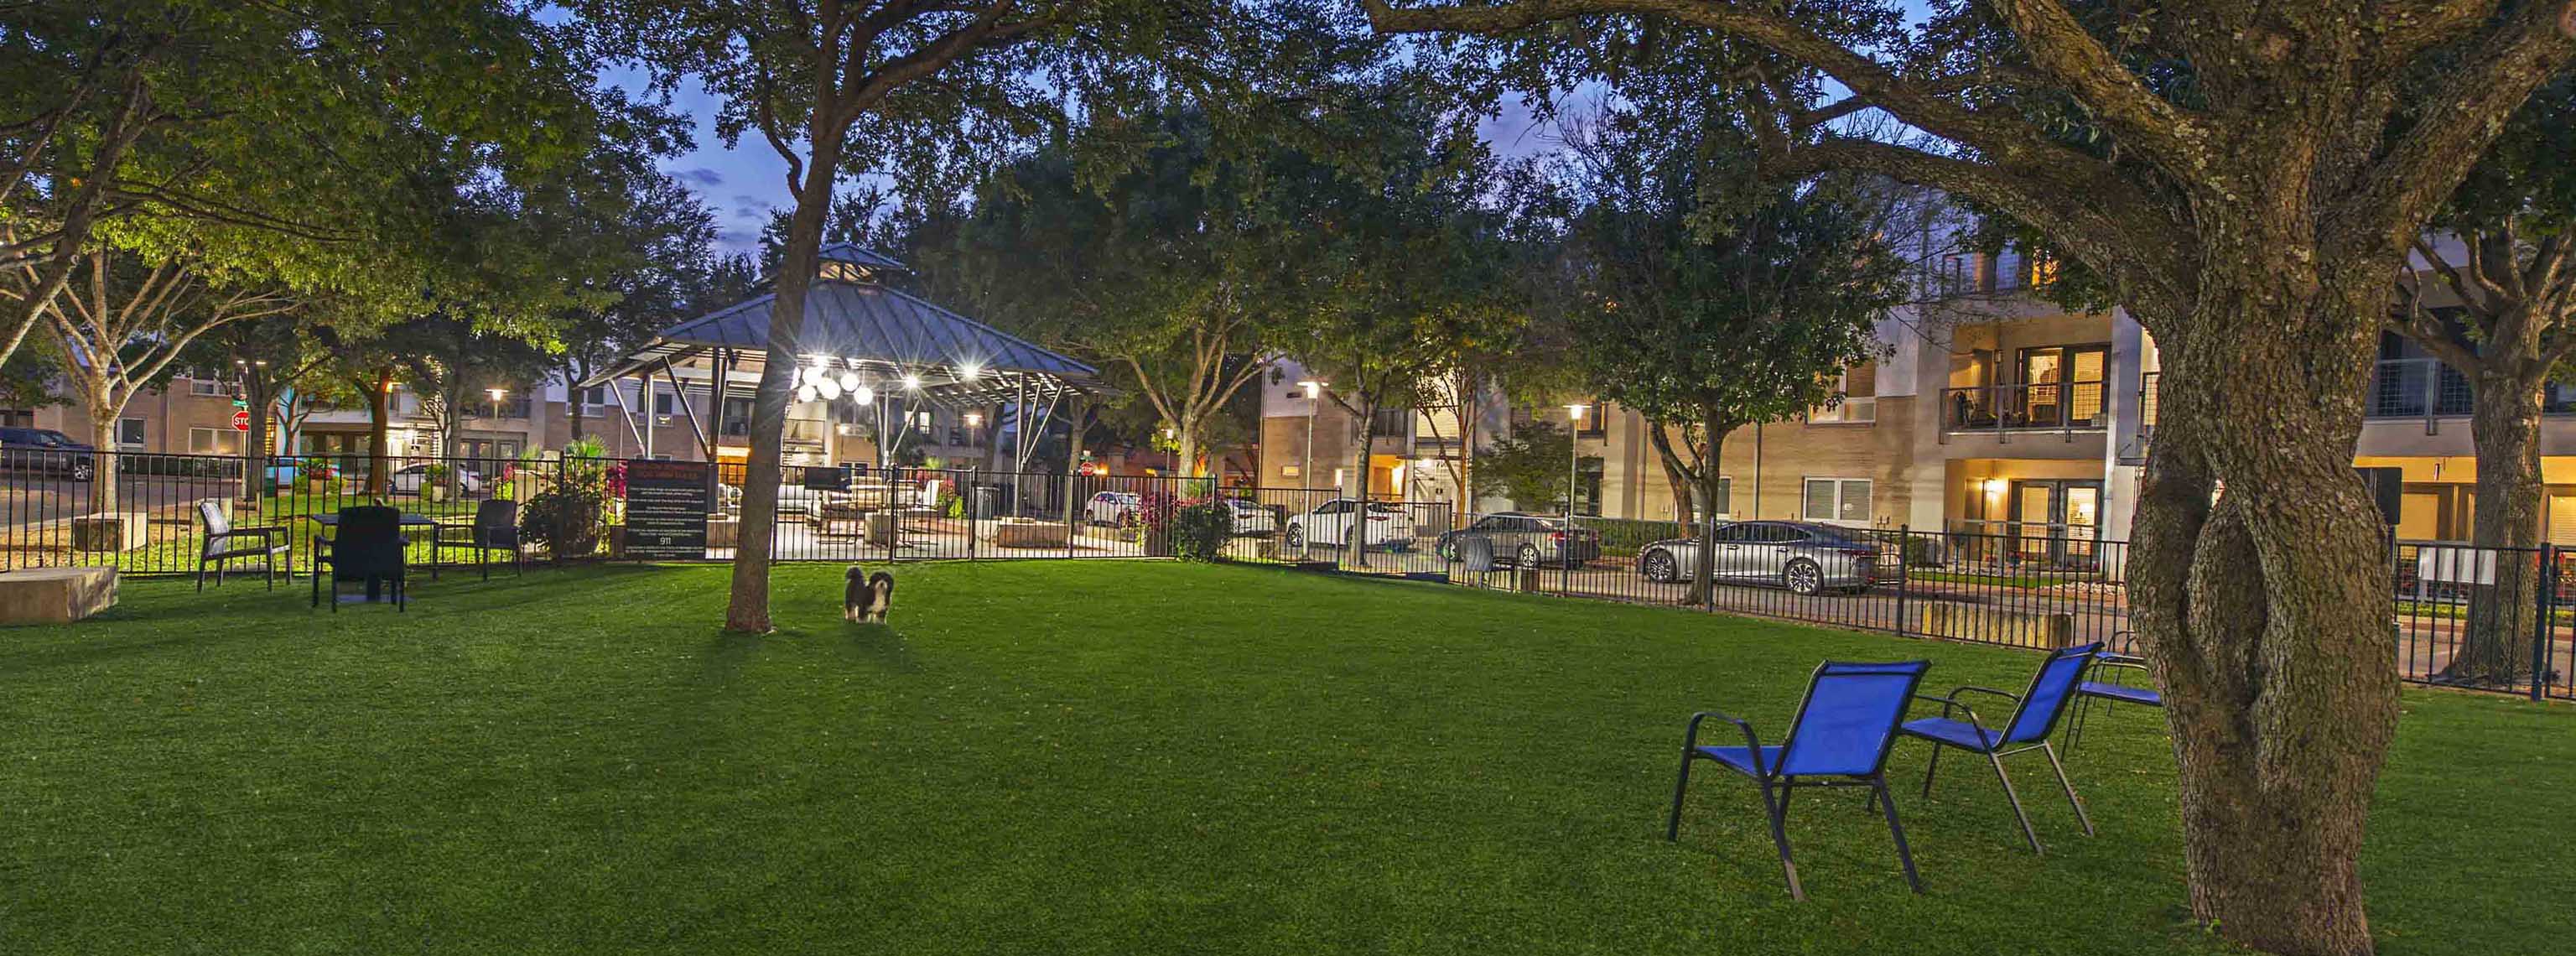 Well lit dog park for your furry friends to enjoy themselves late into the evening